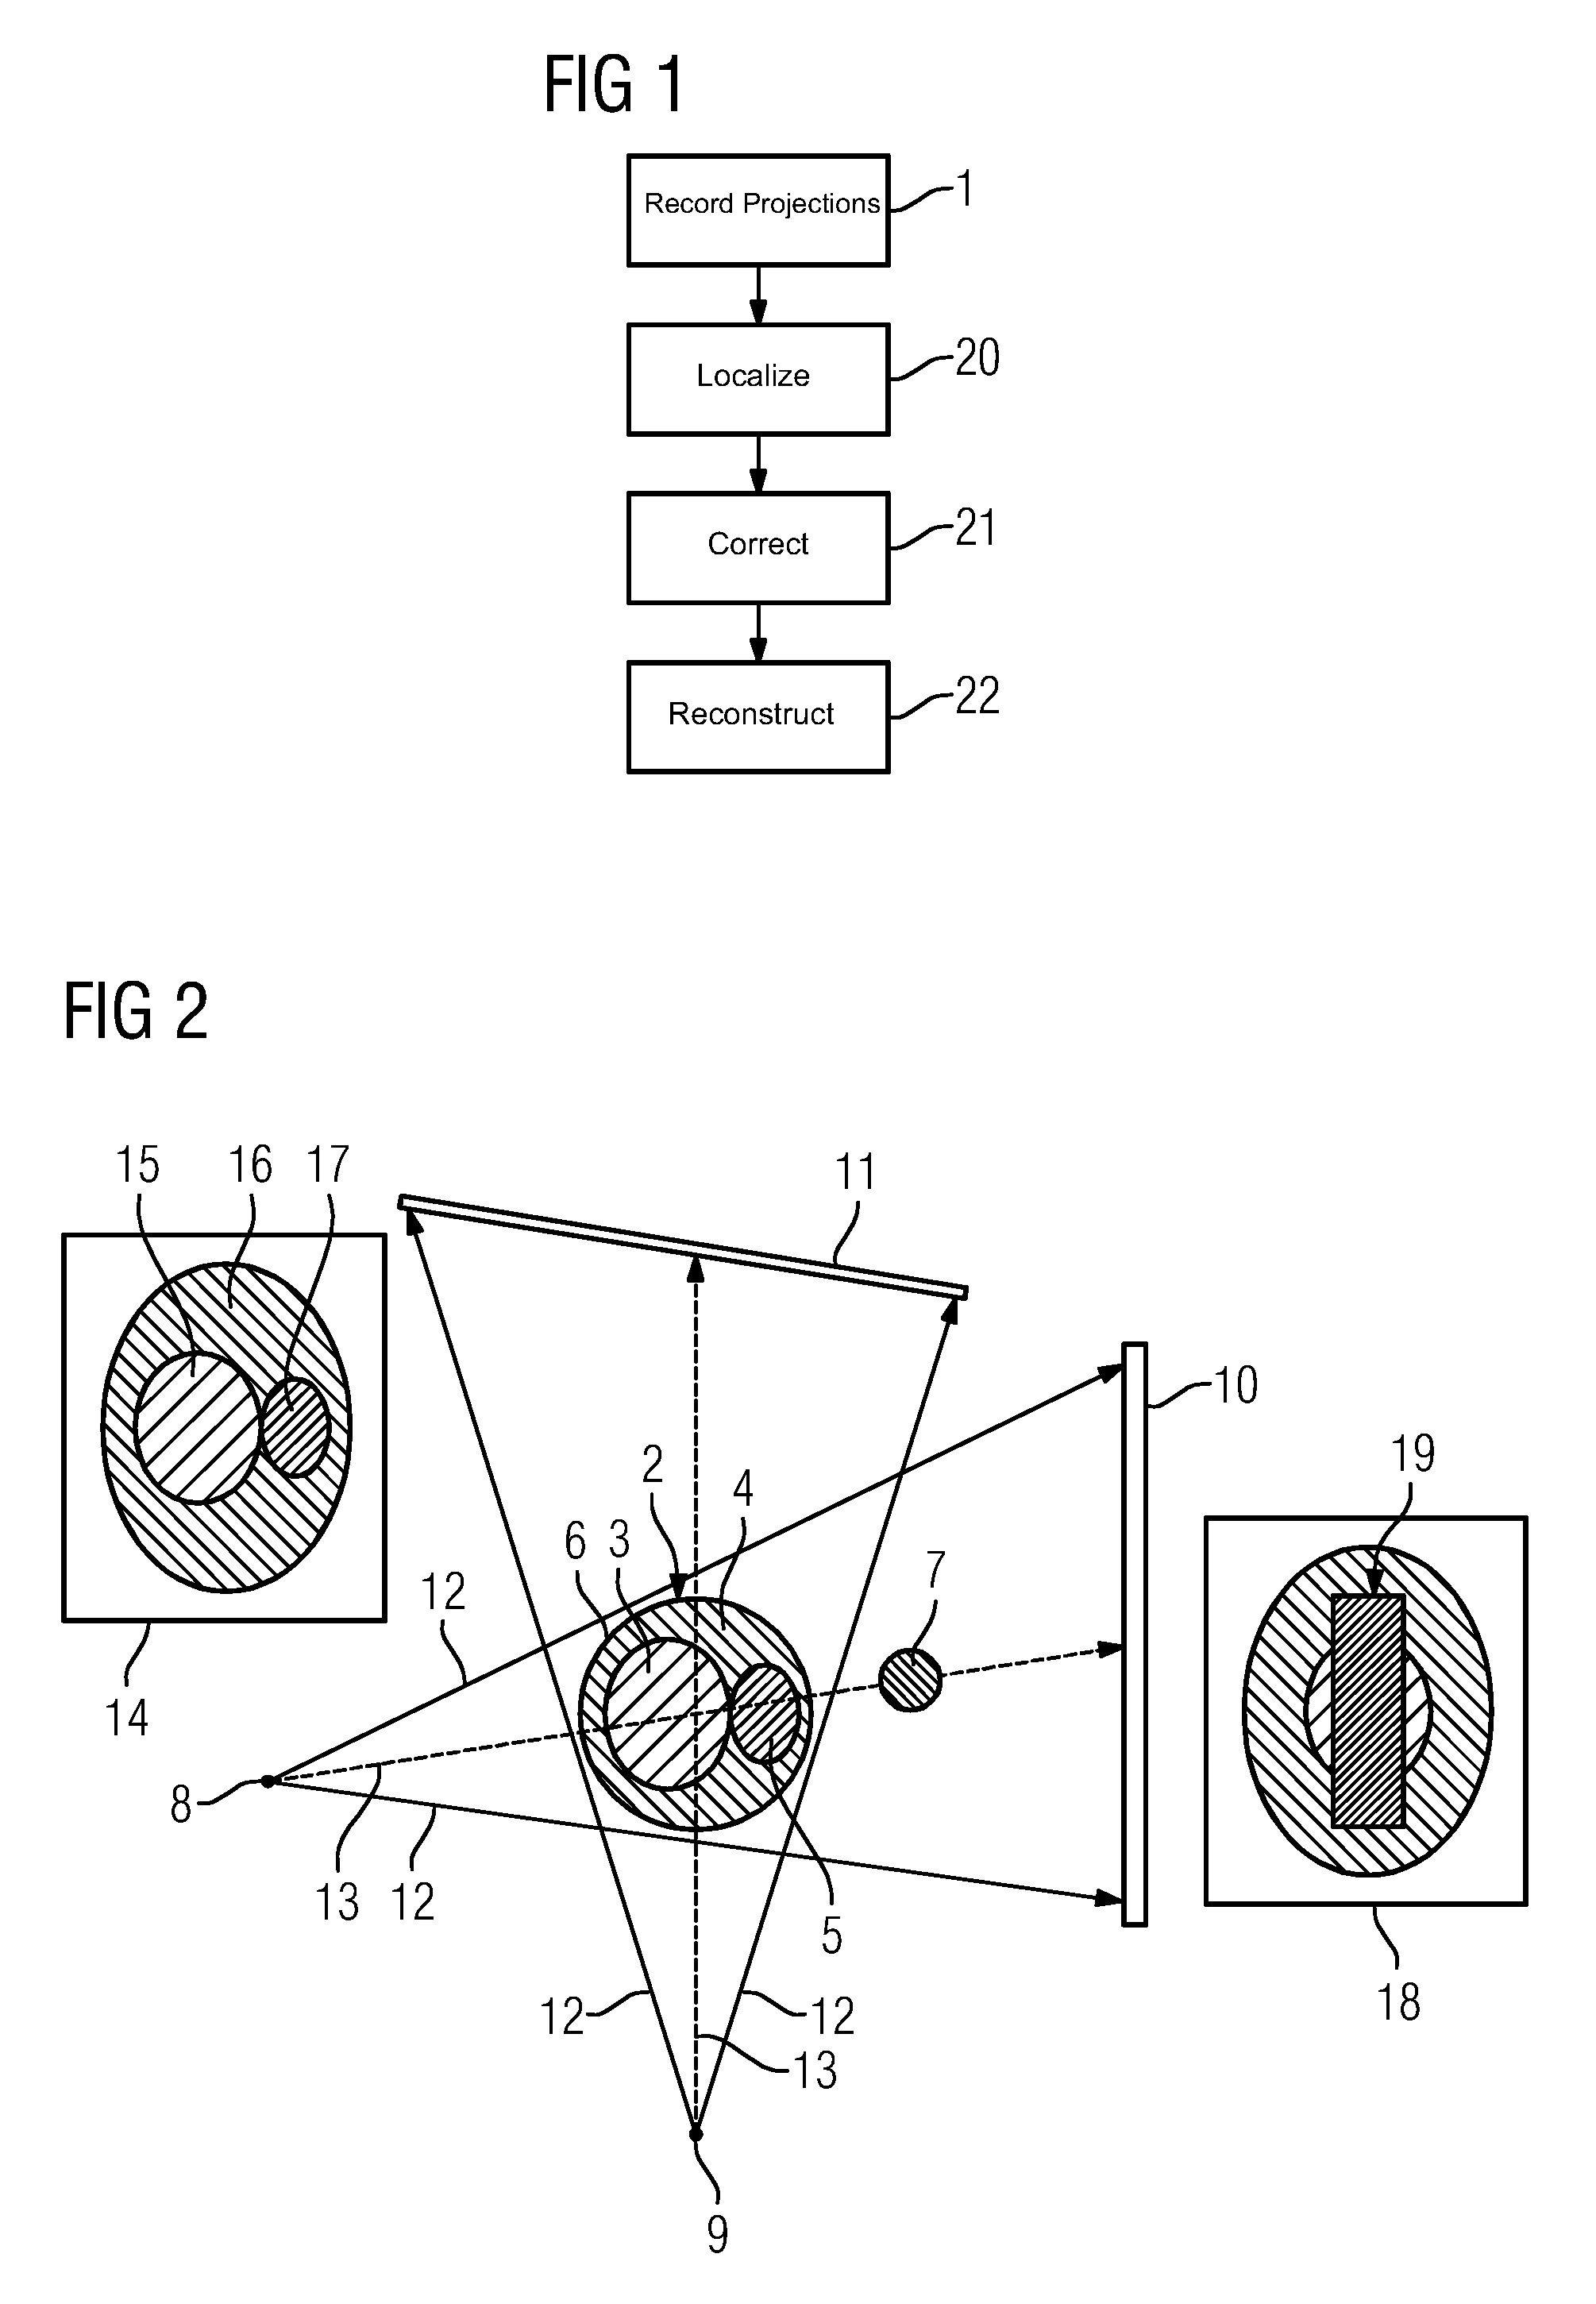 Reducing artifacts in an image data set and X-ray device